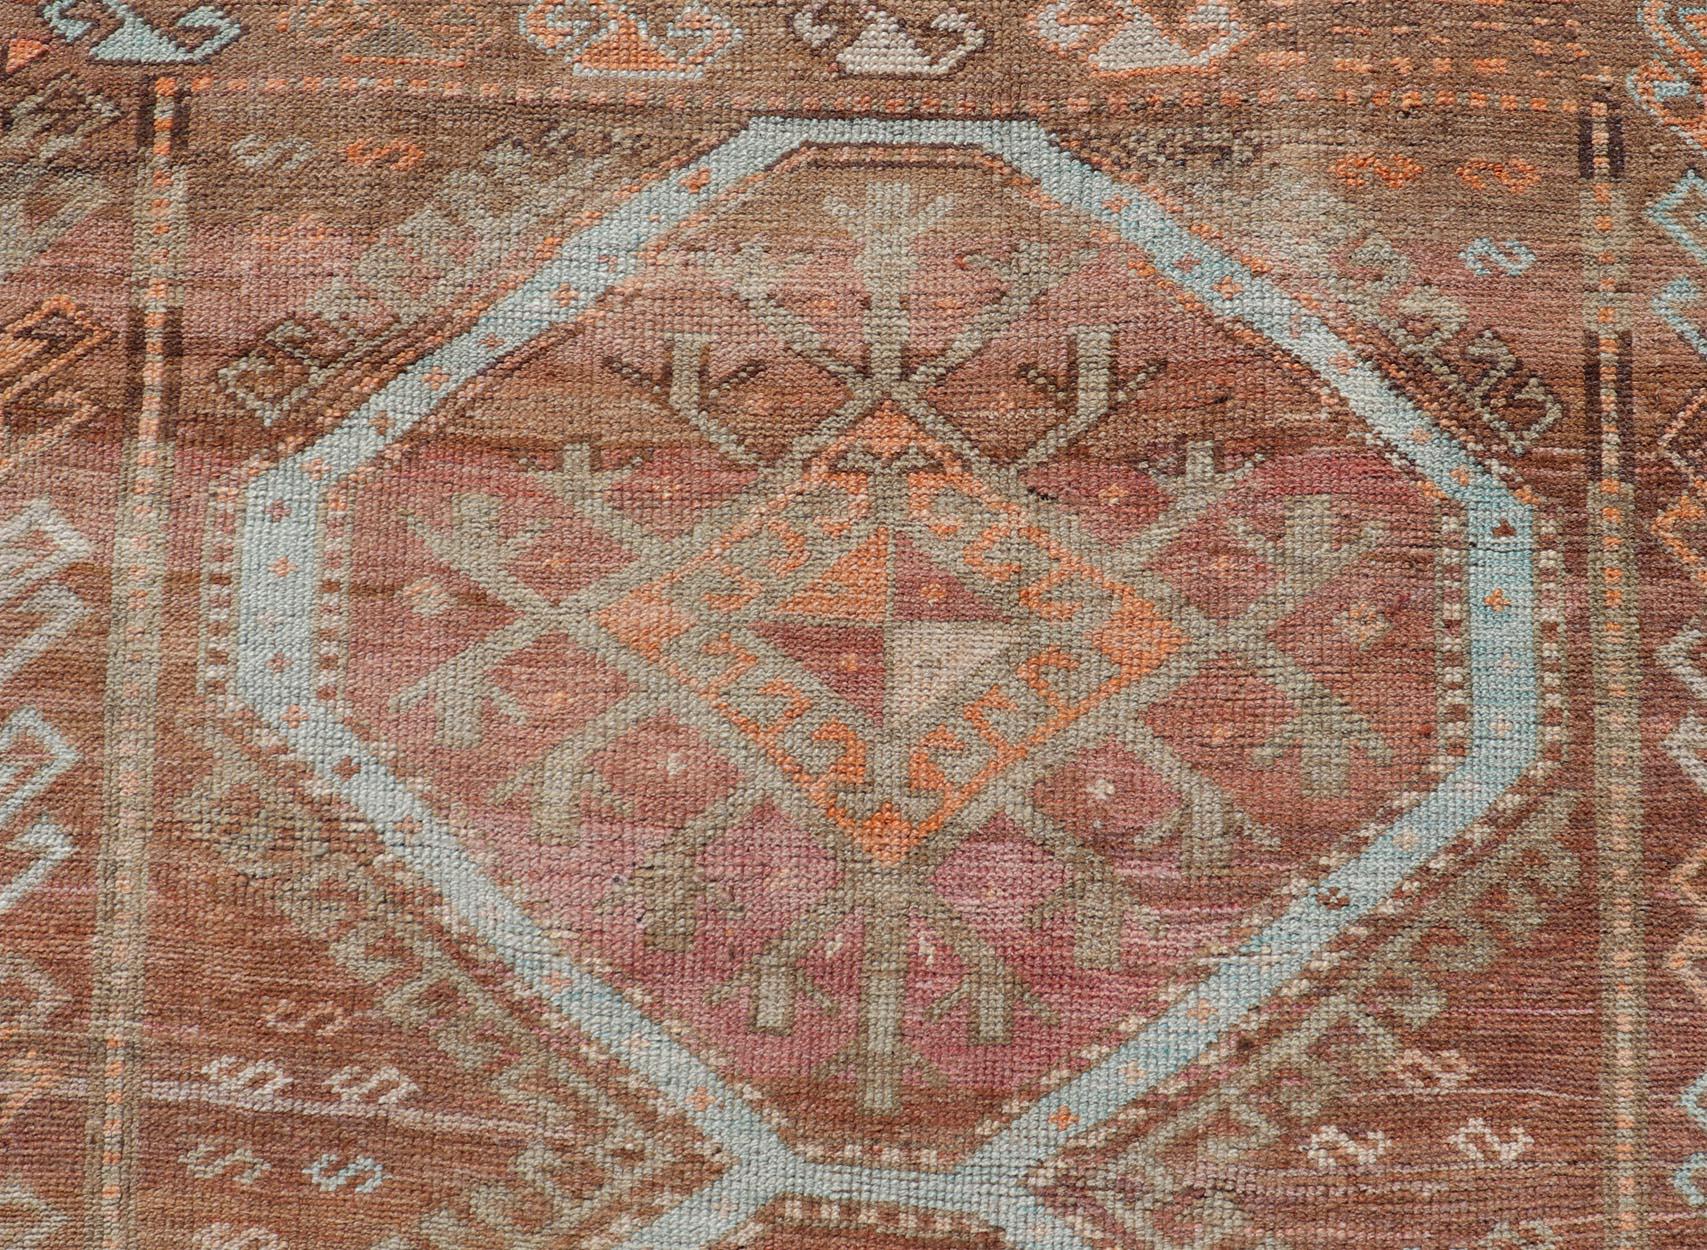 Colorful Turkish Kars Runner in Softer Tones with Tribal and Geometric Motifs For Sale 4